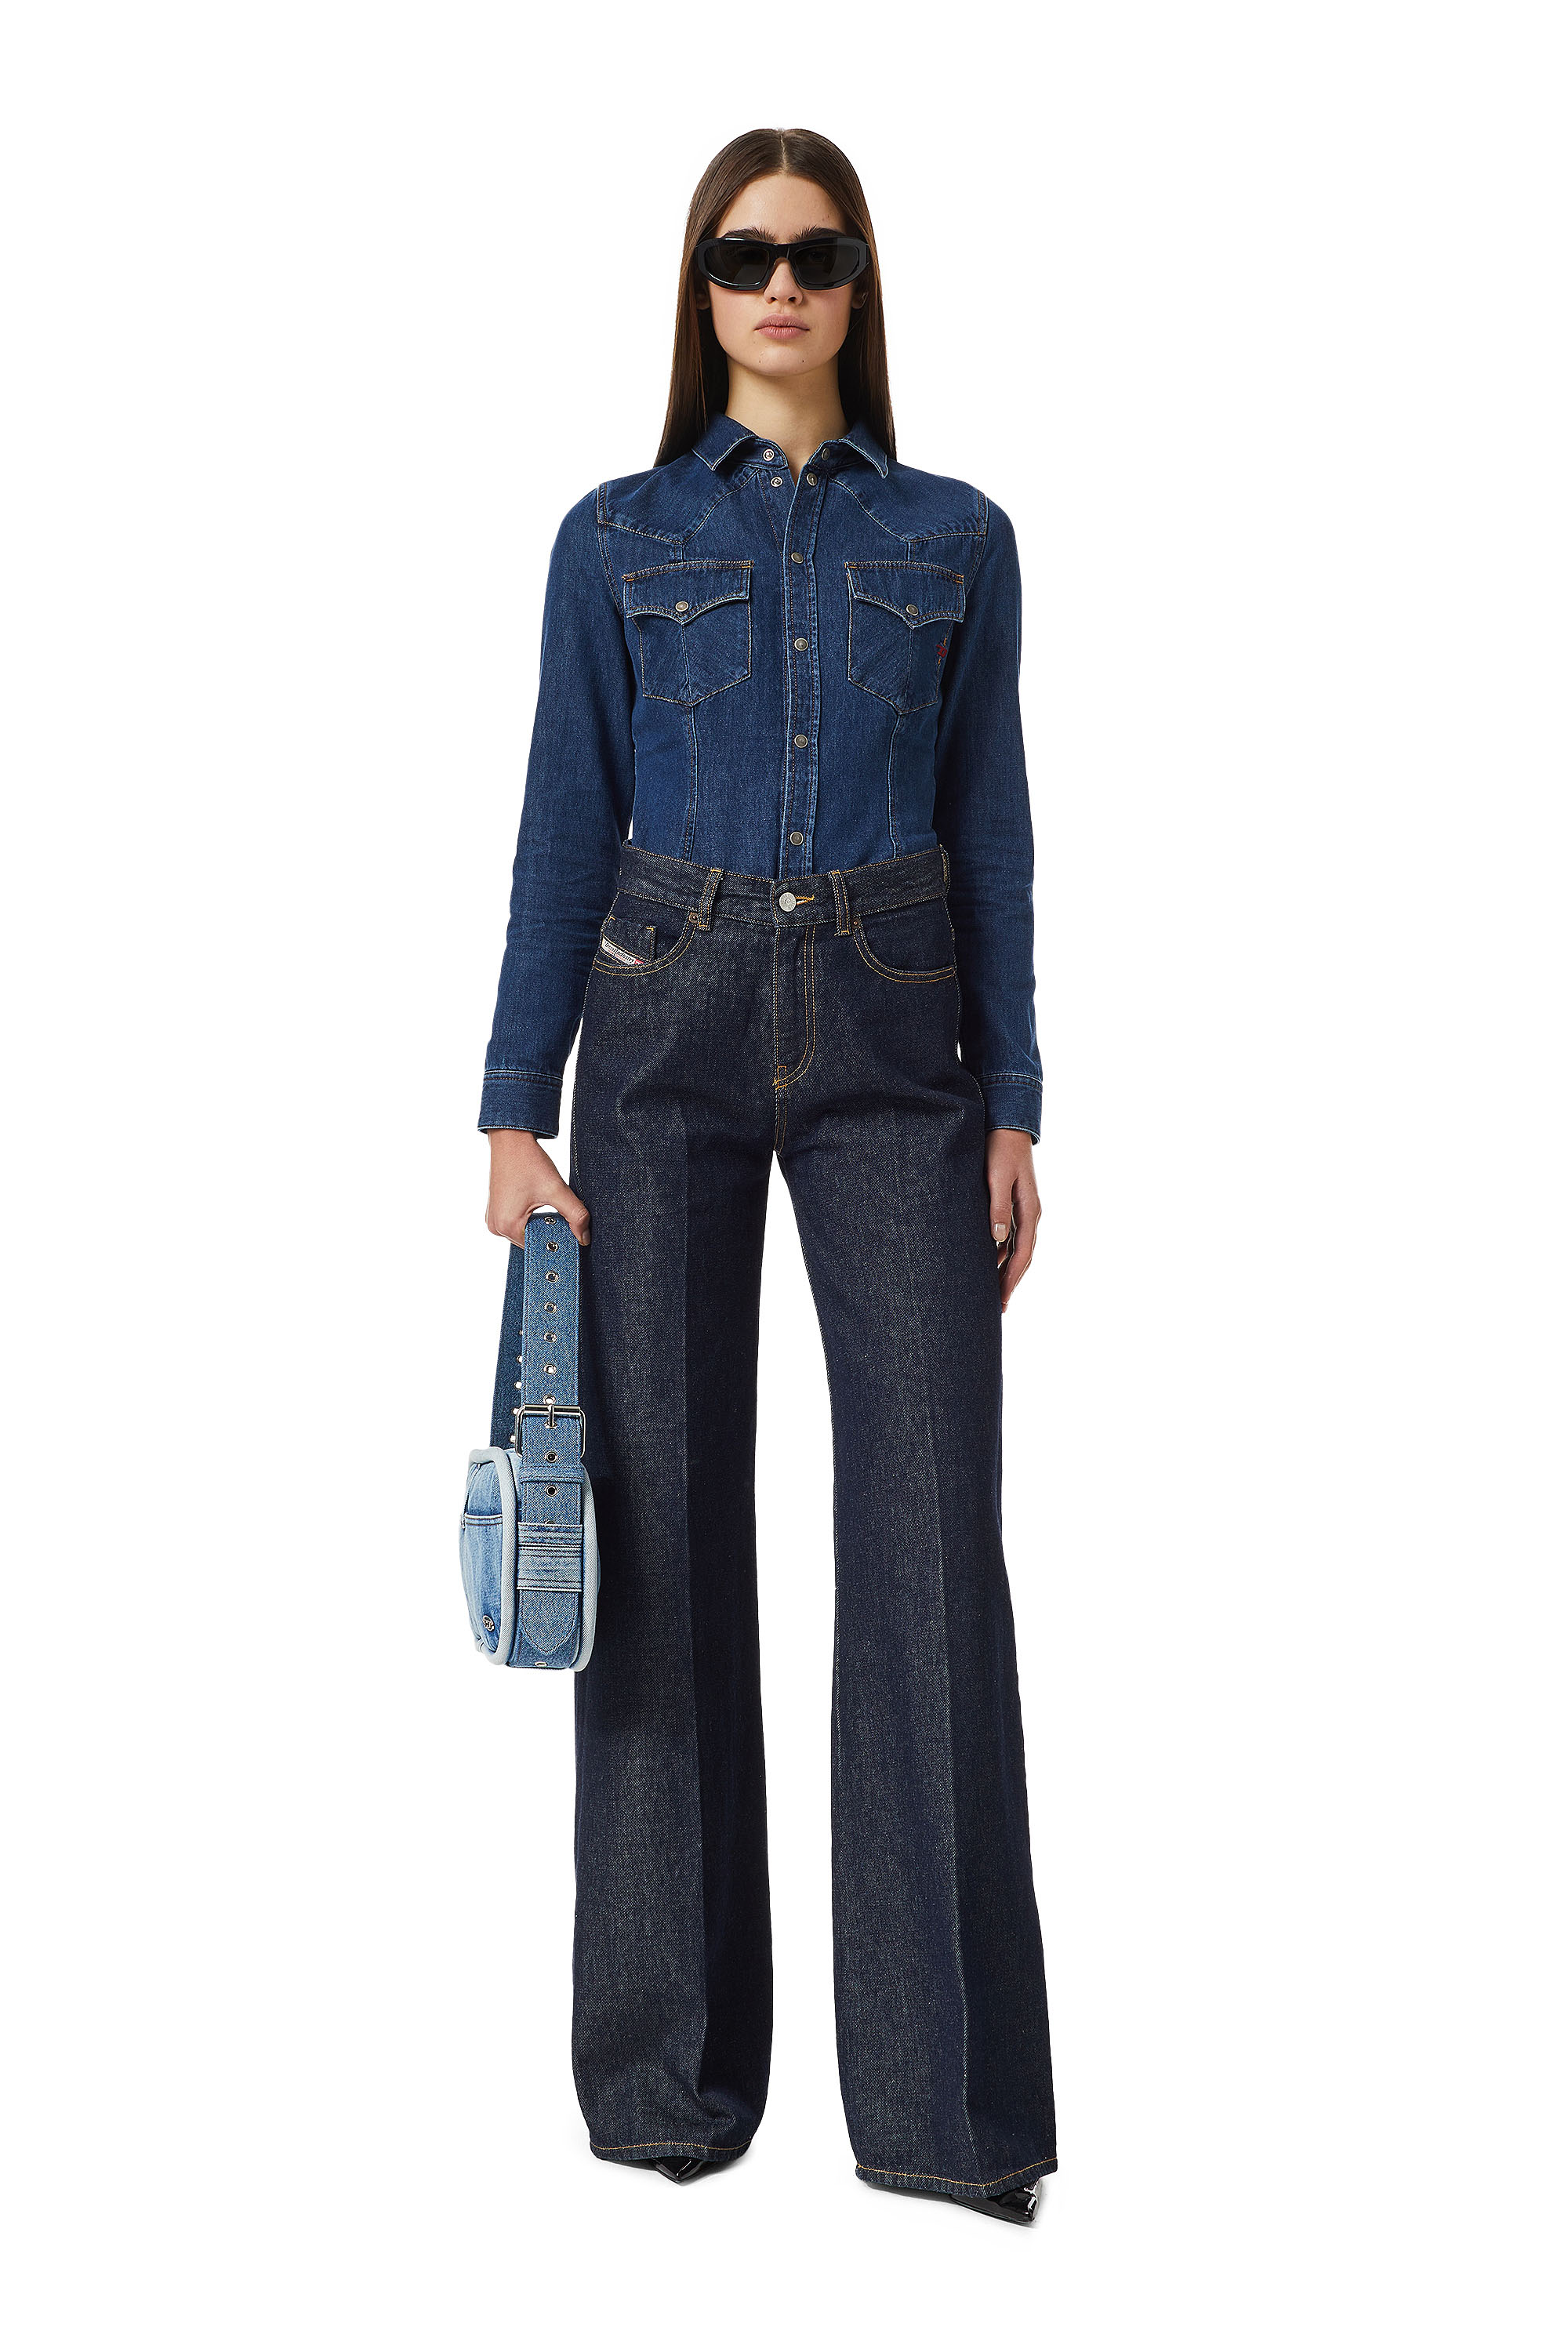 Diesel - 1978 Z9C02 Bootcut and Flare Jeans, Azul Oscuro - Image 5